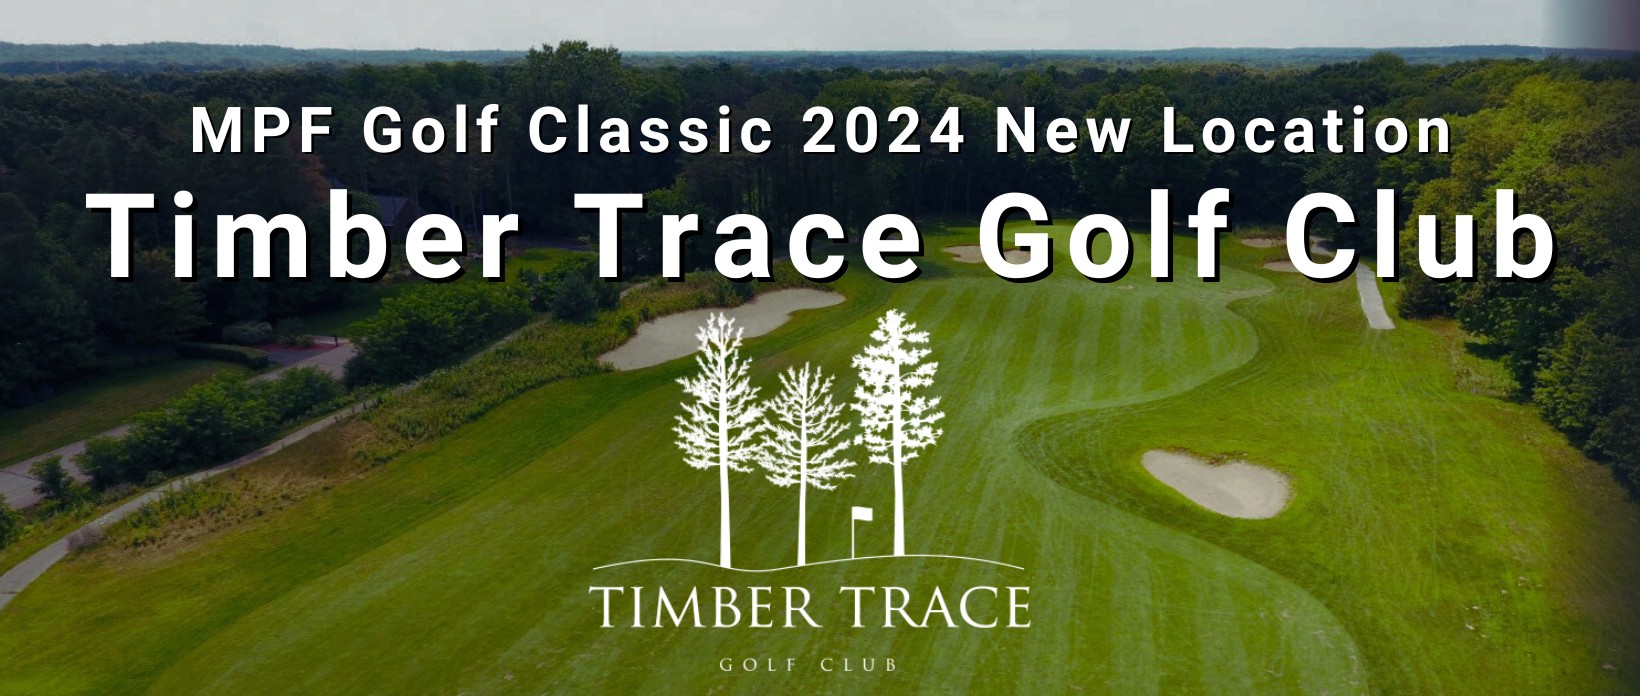 Timber Trace Fairway MPF Golf Classic